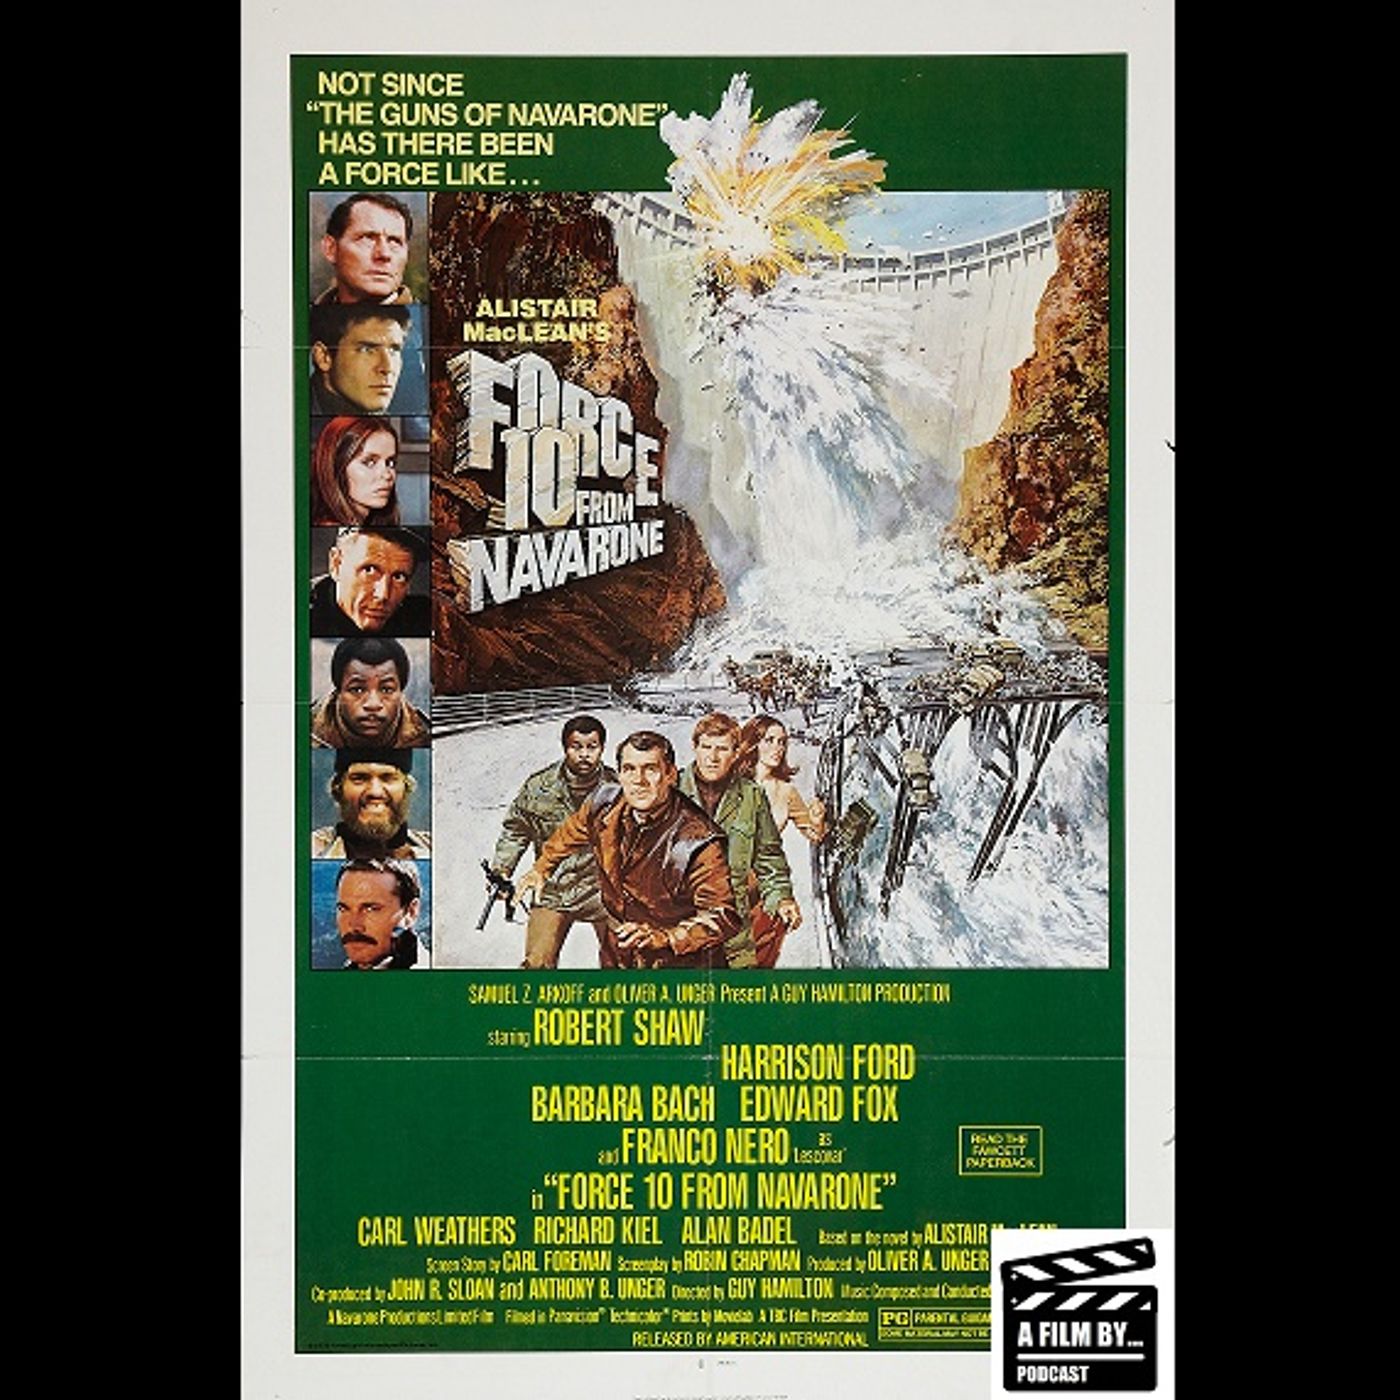 A Film at 45 - Force 10 From Navarone